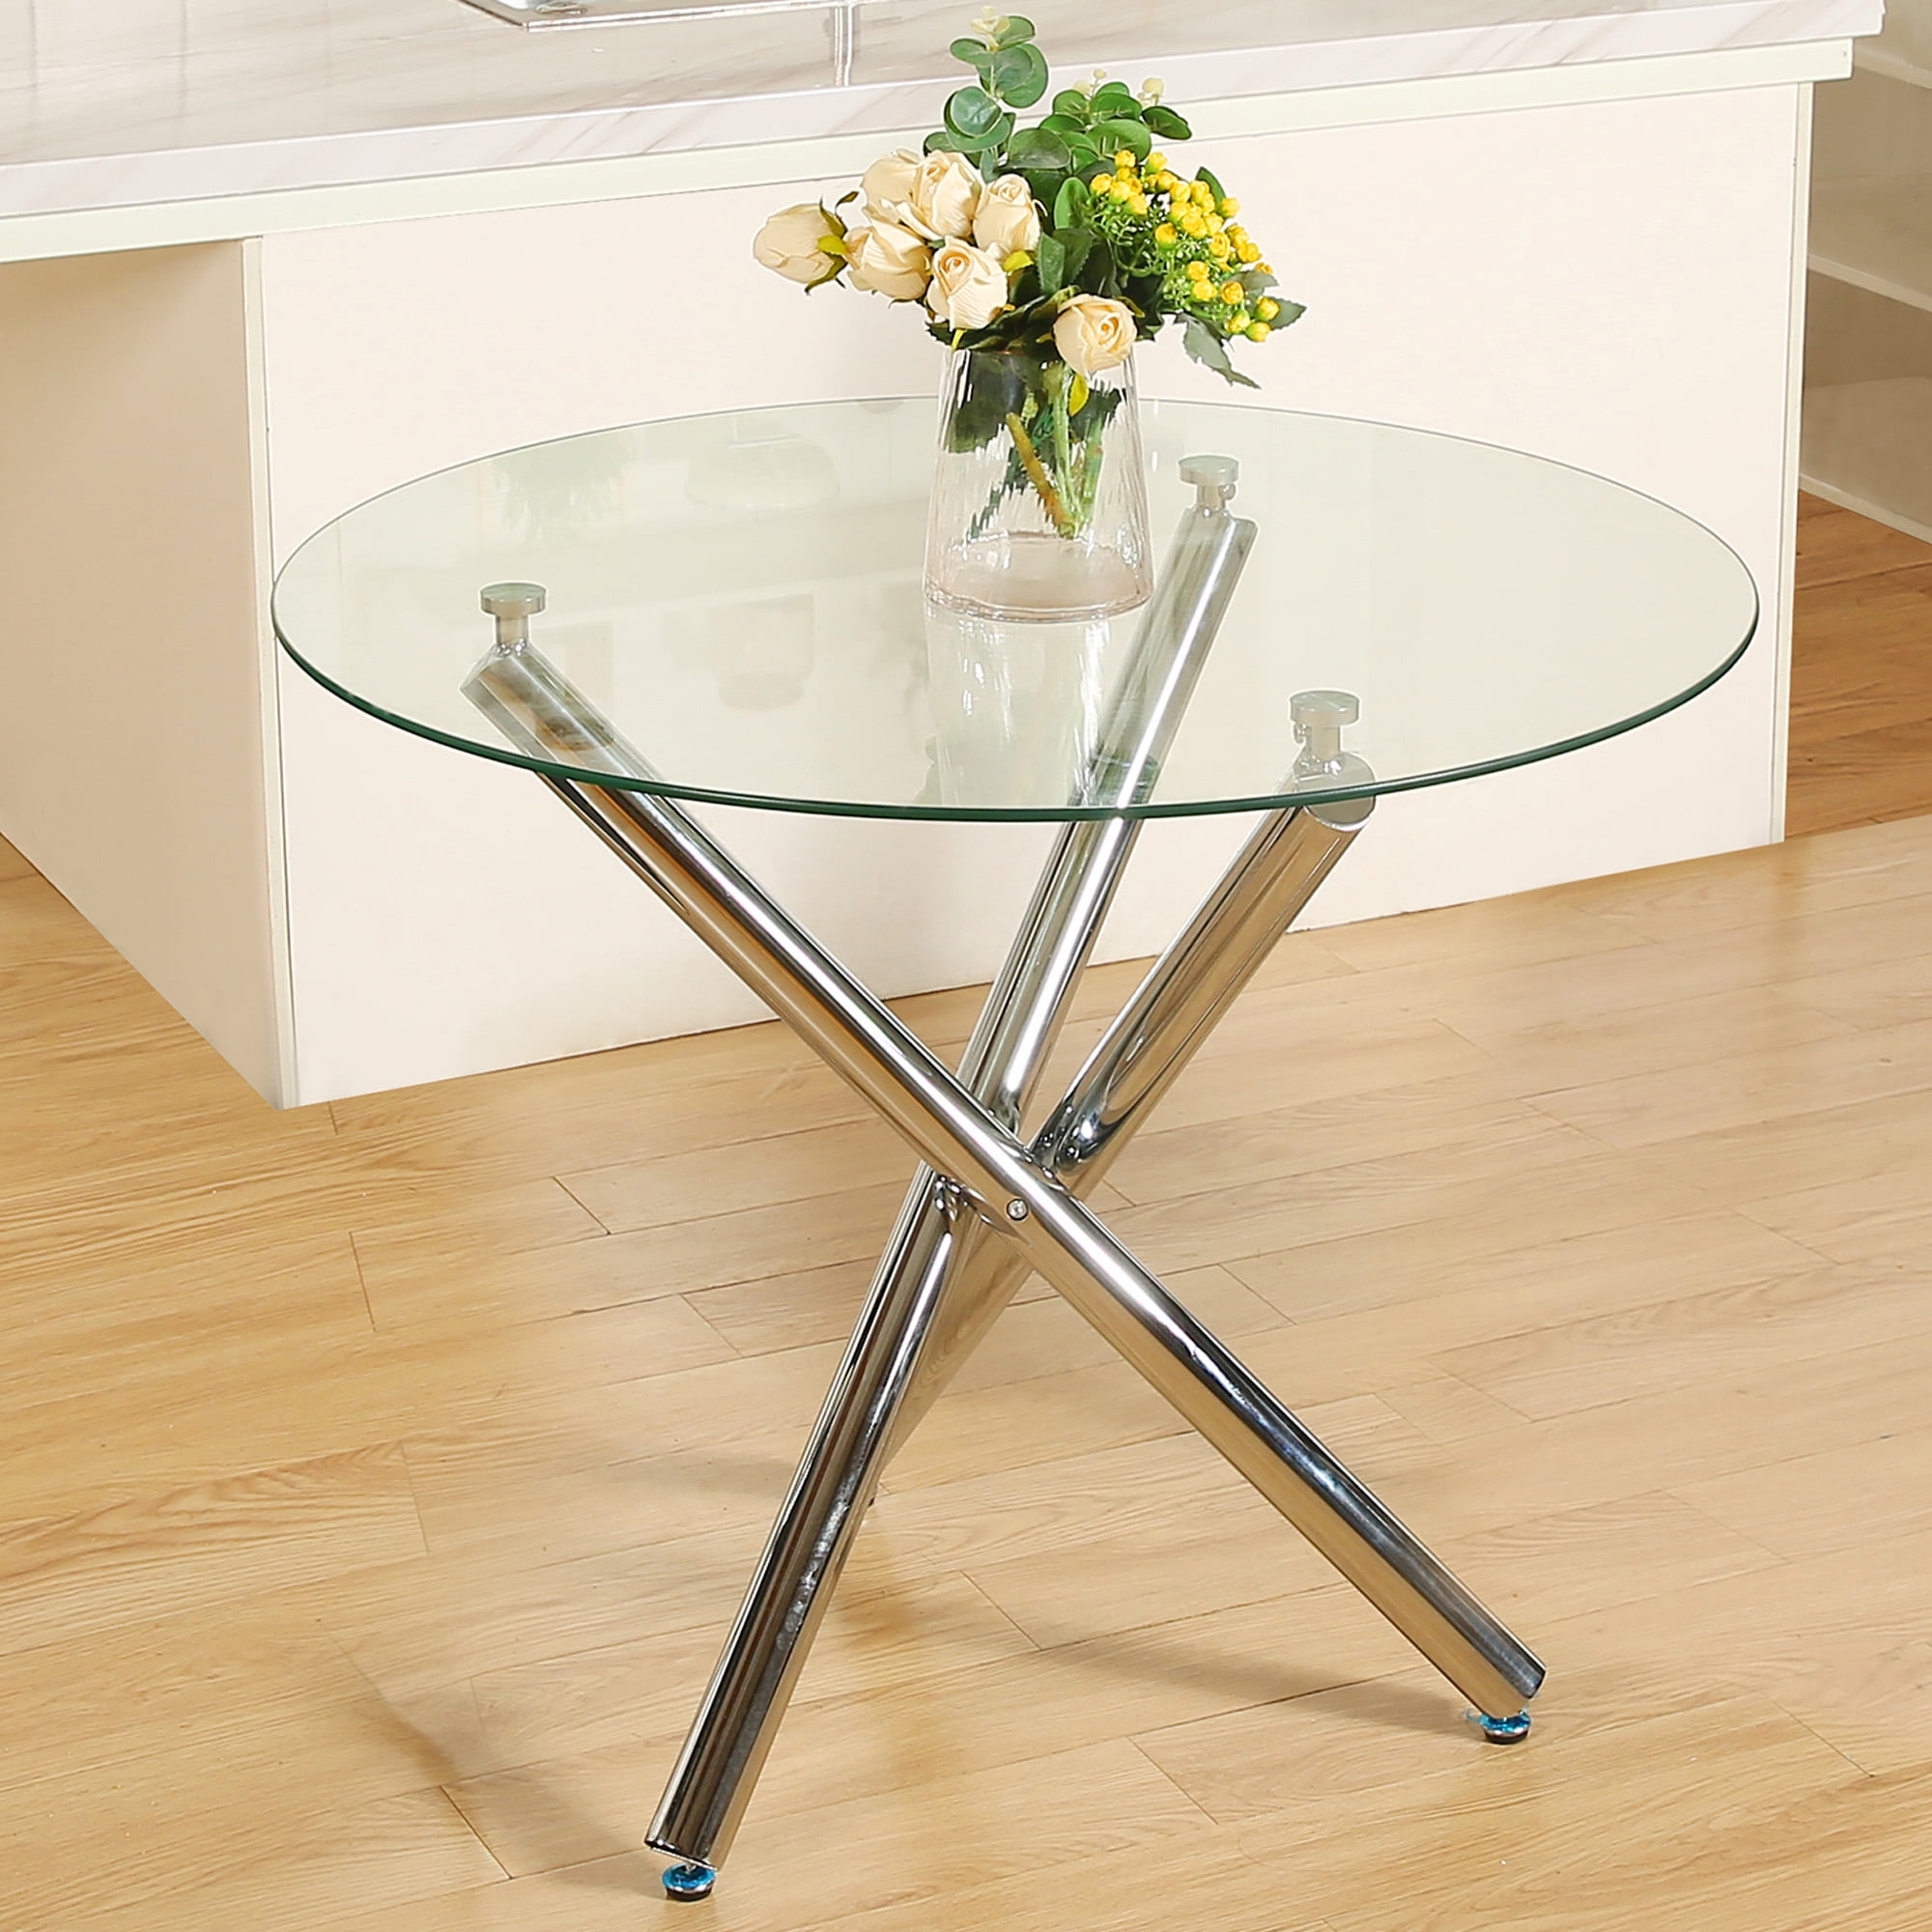 Round Dining Room Table Modern, Coaster Furniture Round Glass Top End Table Chrome